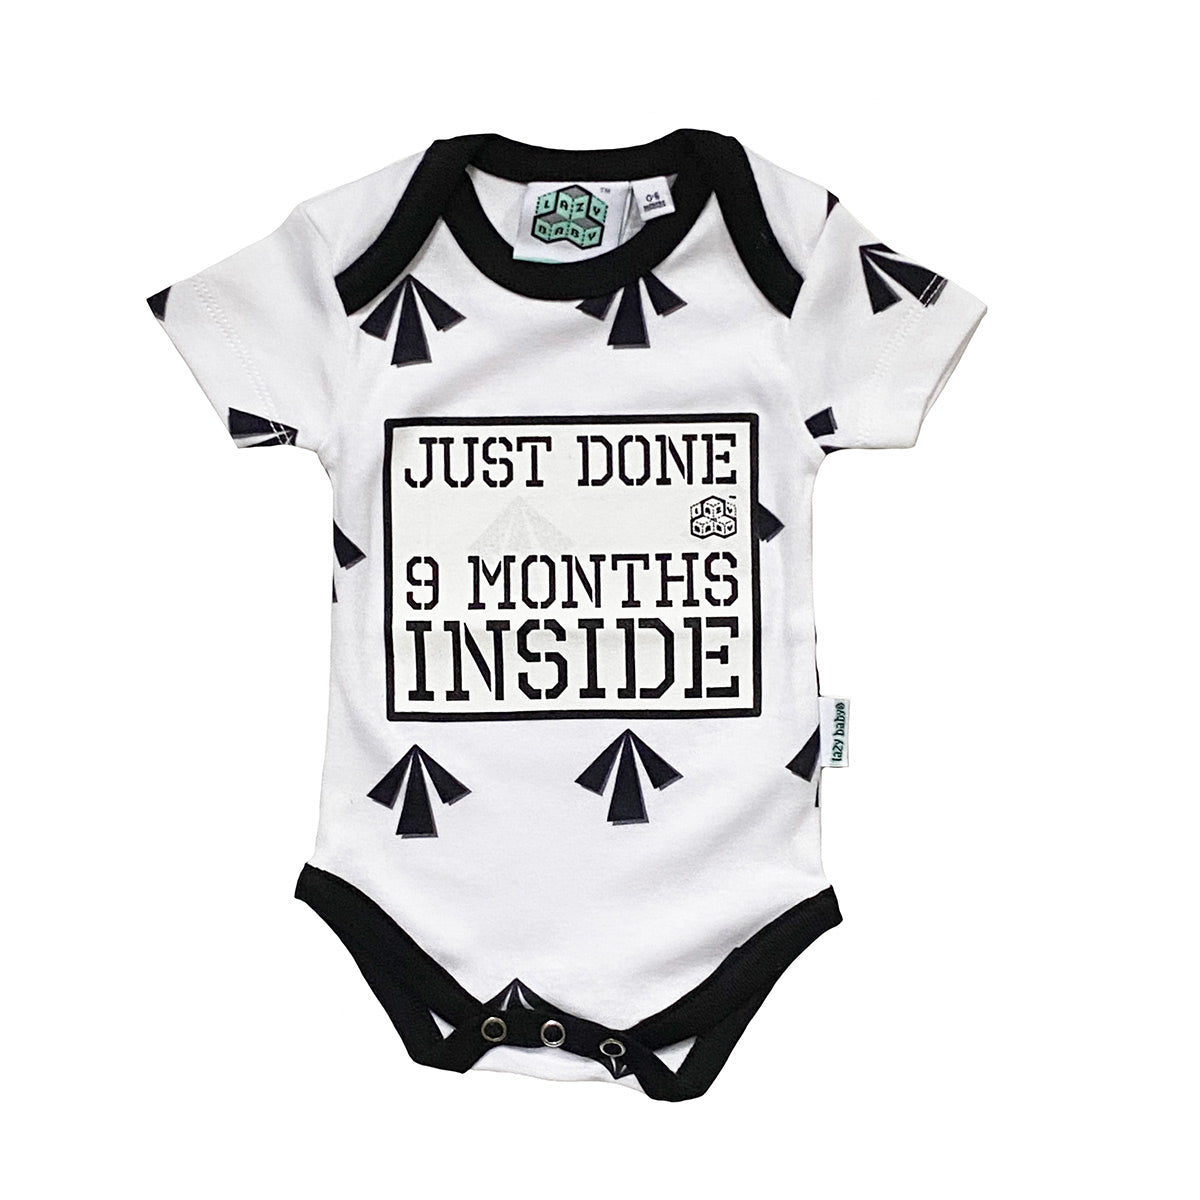 New Born Gift -Just Done 9 Months Inside® Arrows Vest - Pregnancy Reveal - Coming Home Outfit - Baby Announcement